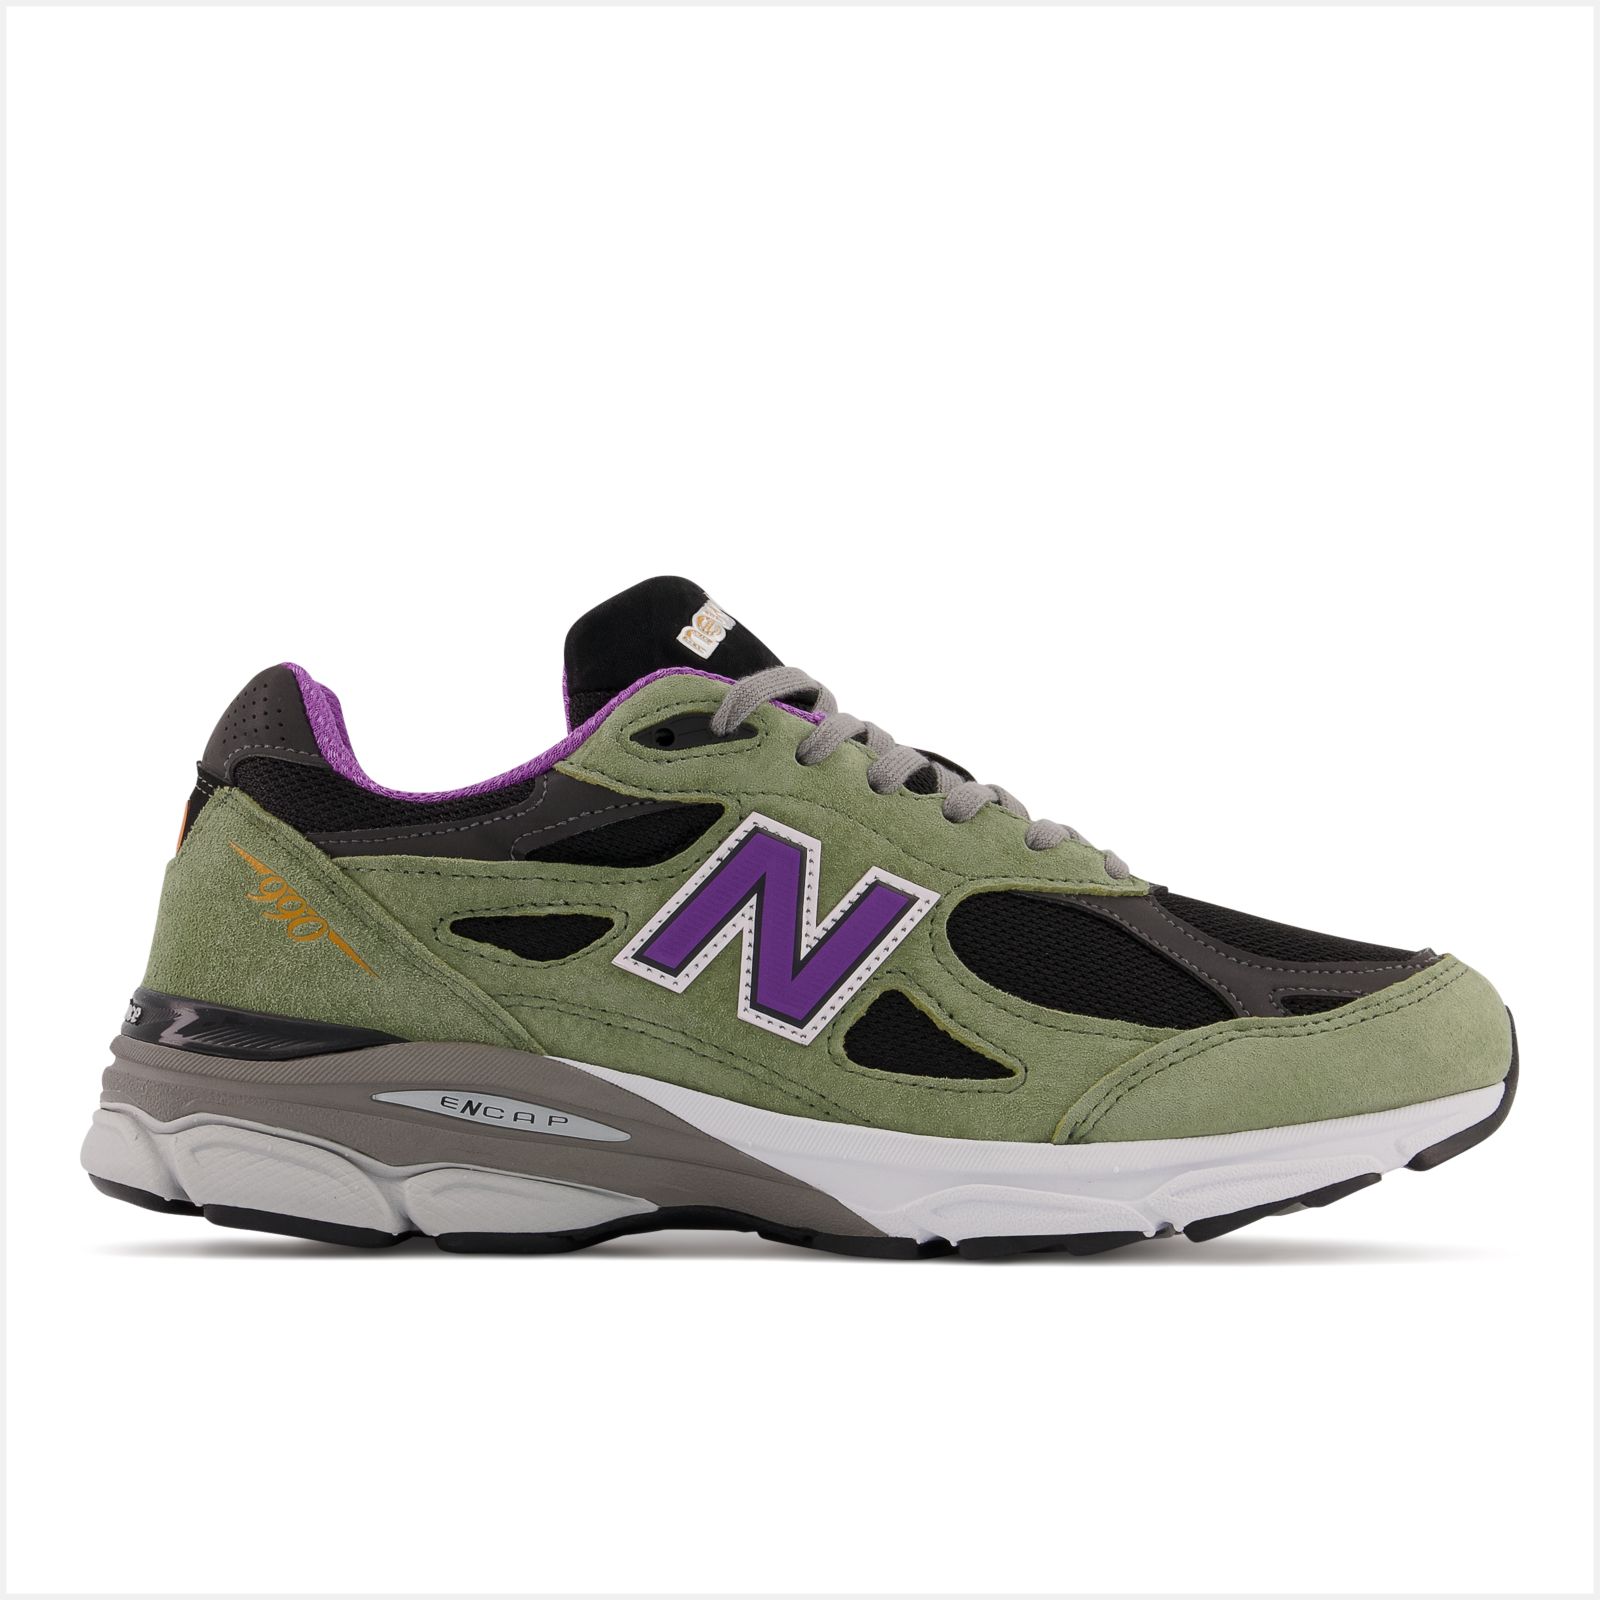 Men's MADE in USA 990v3 Shoes - New Balance